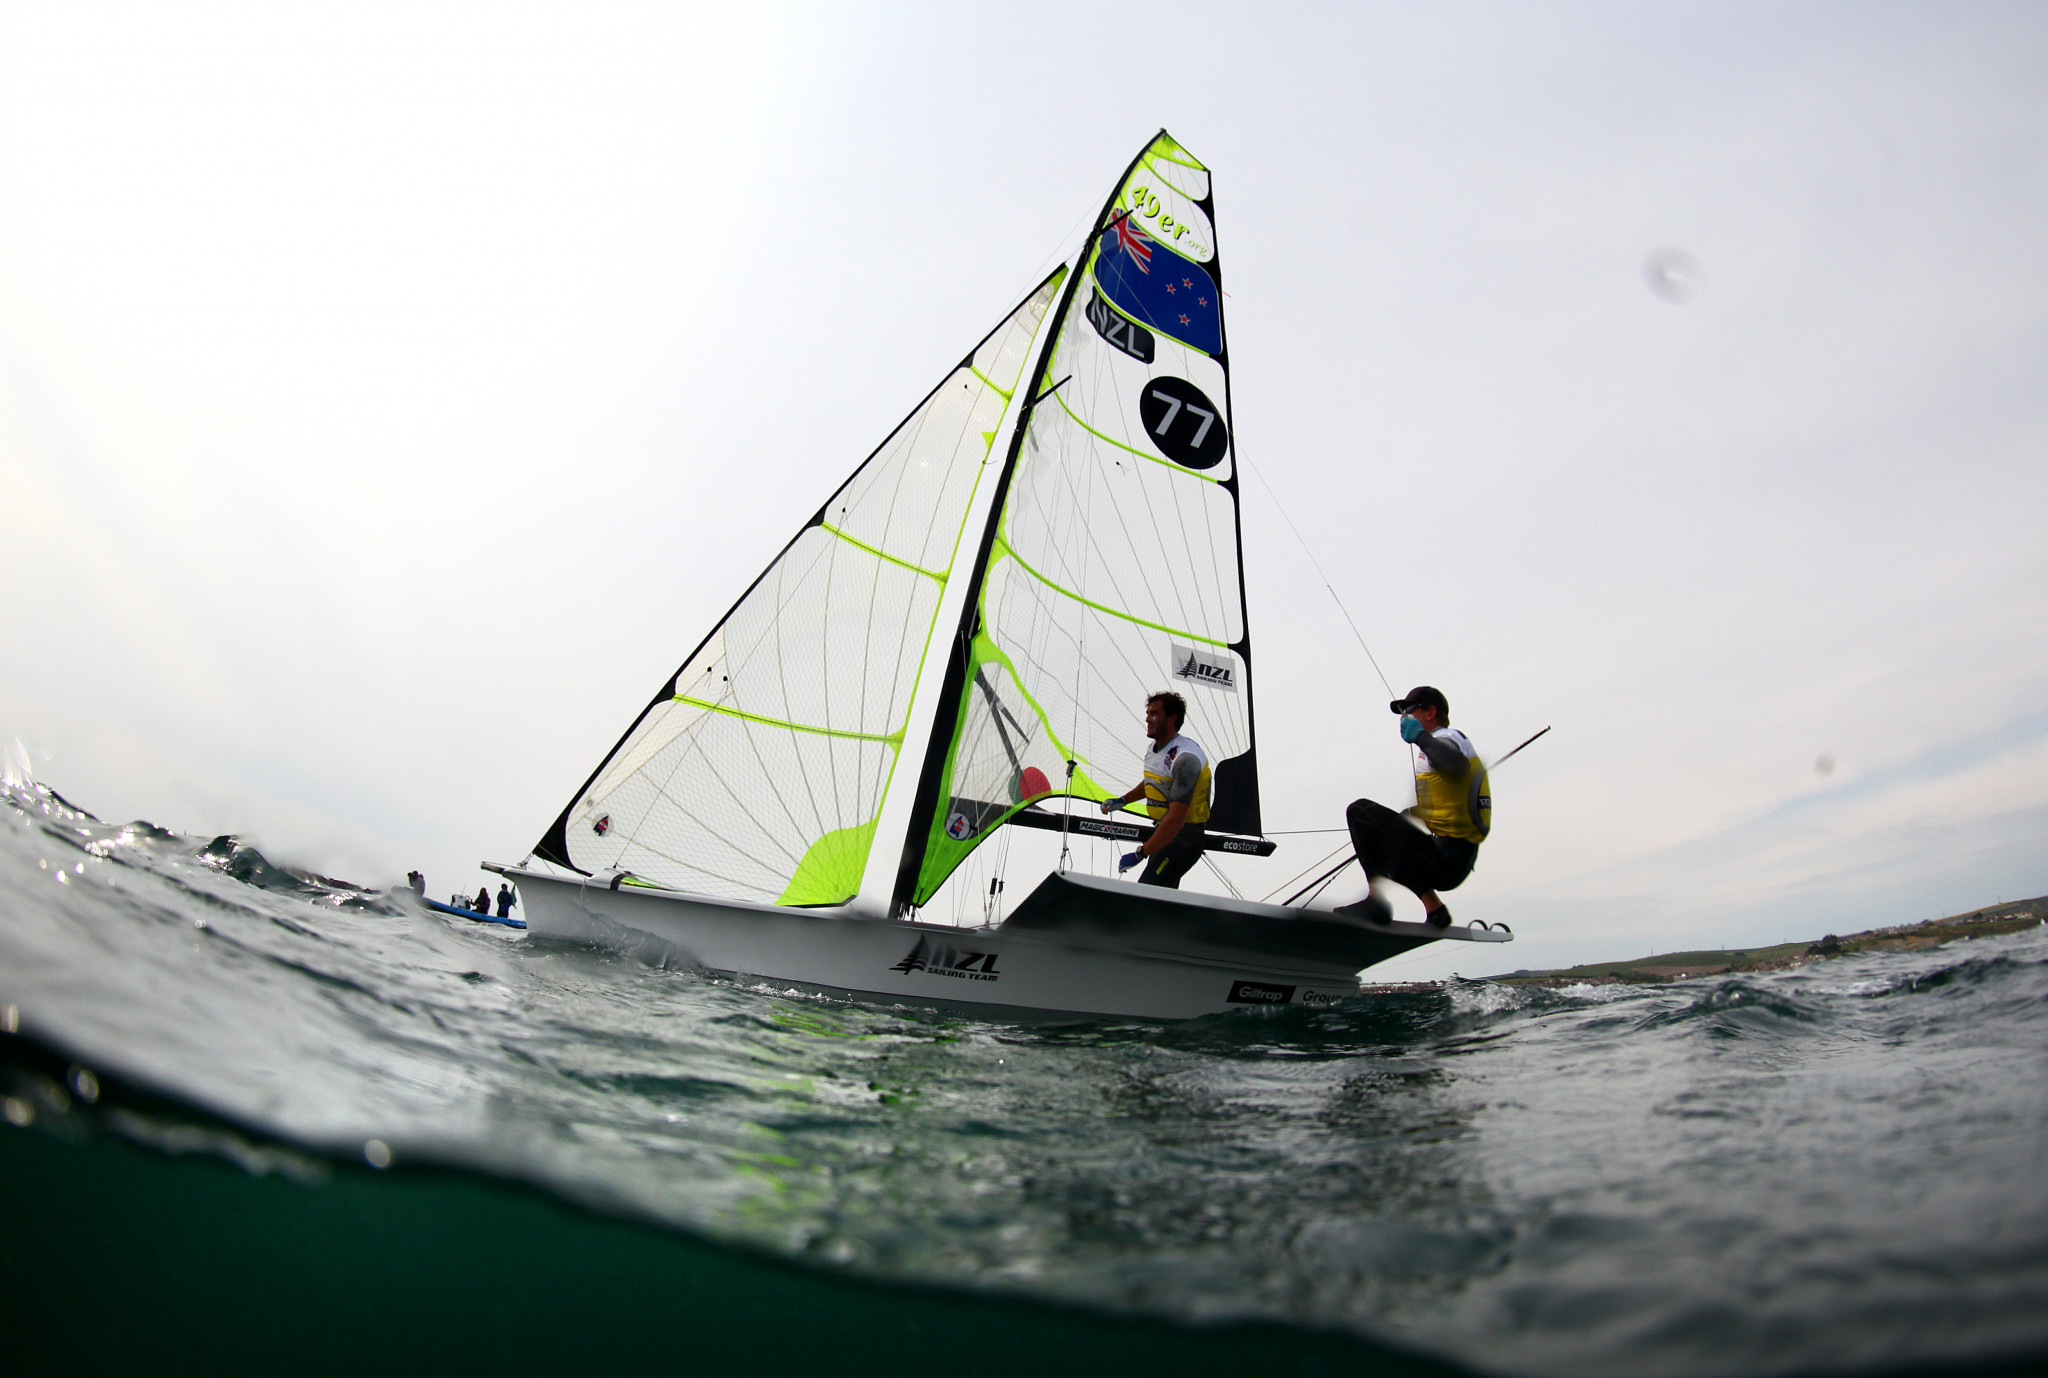 New Zealand's Rio 2016 49er champions Peter Burling and Blair Tuke are seeking Olympic qualification at the 49er World Championships 